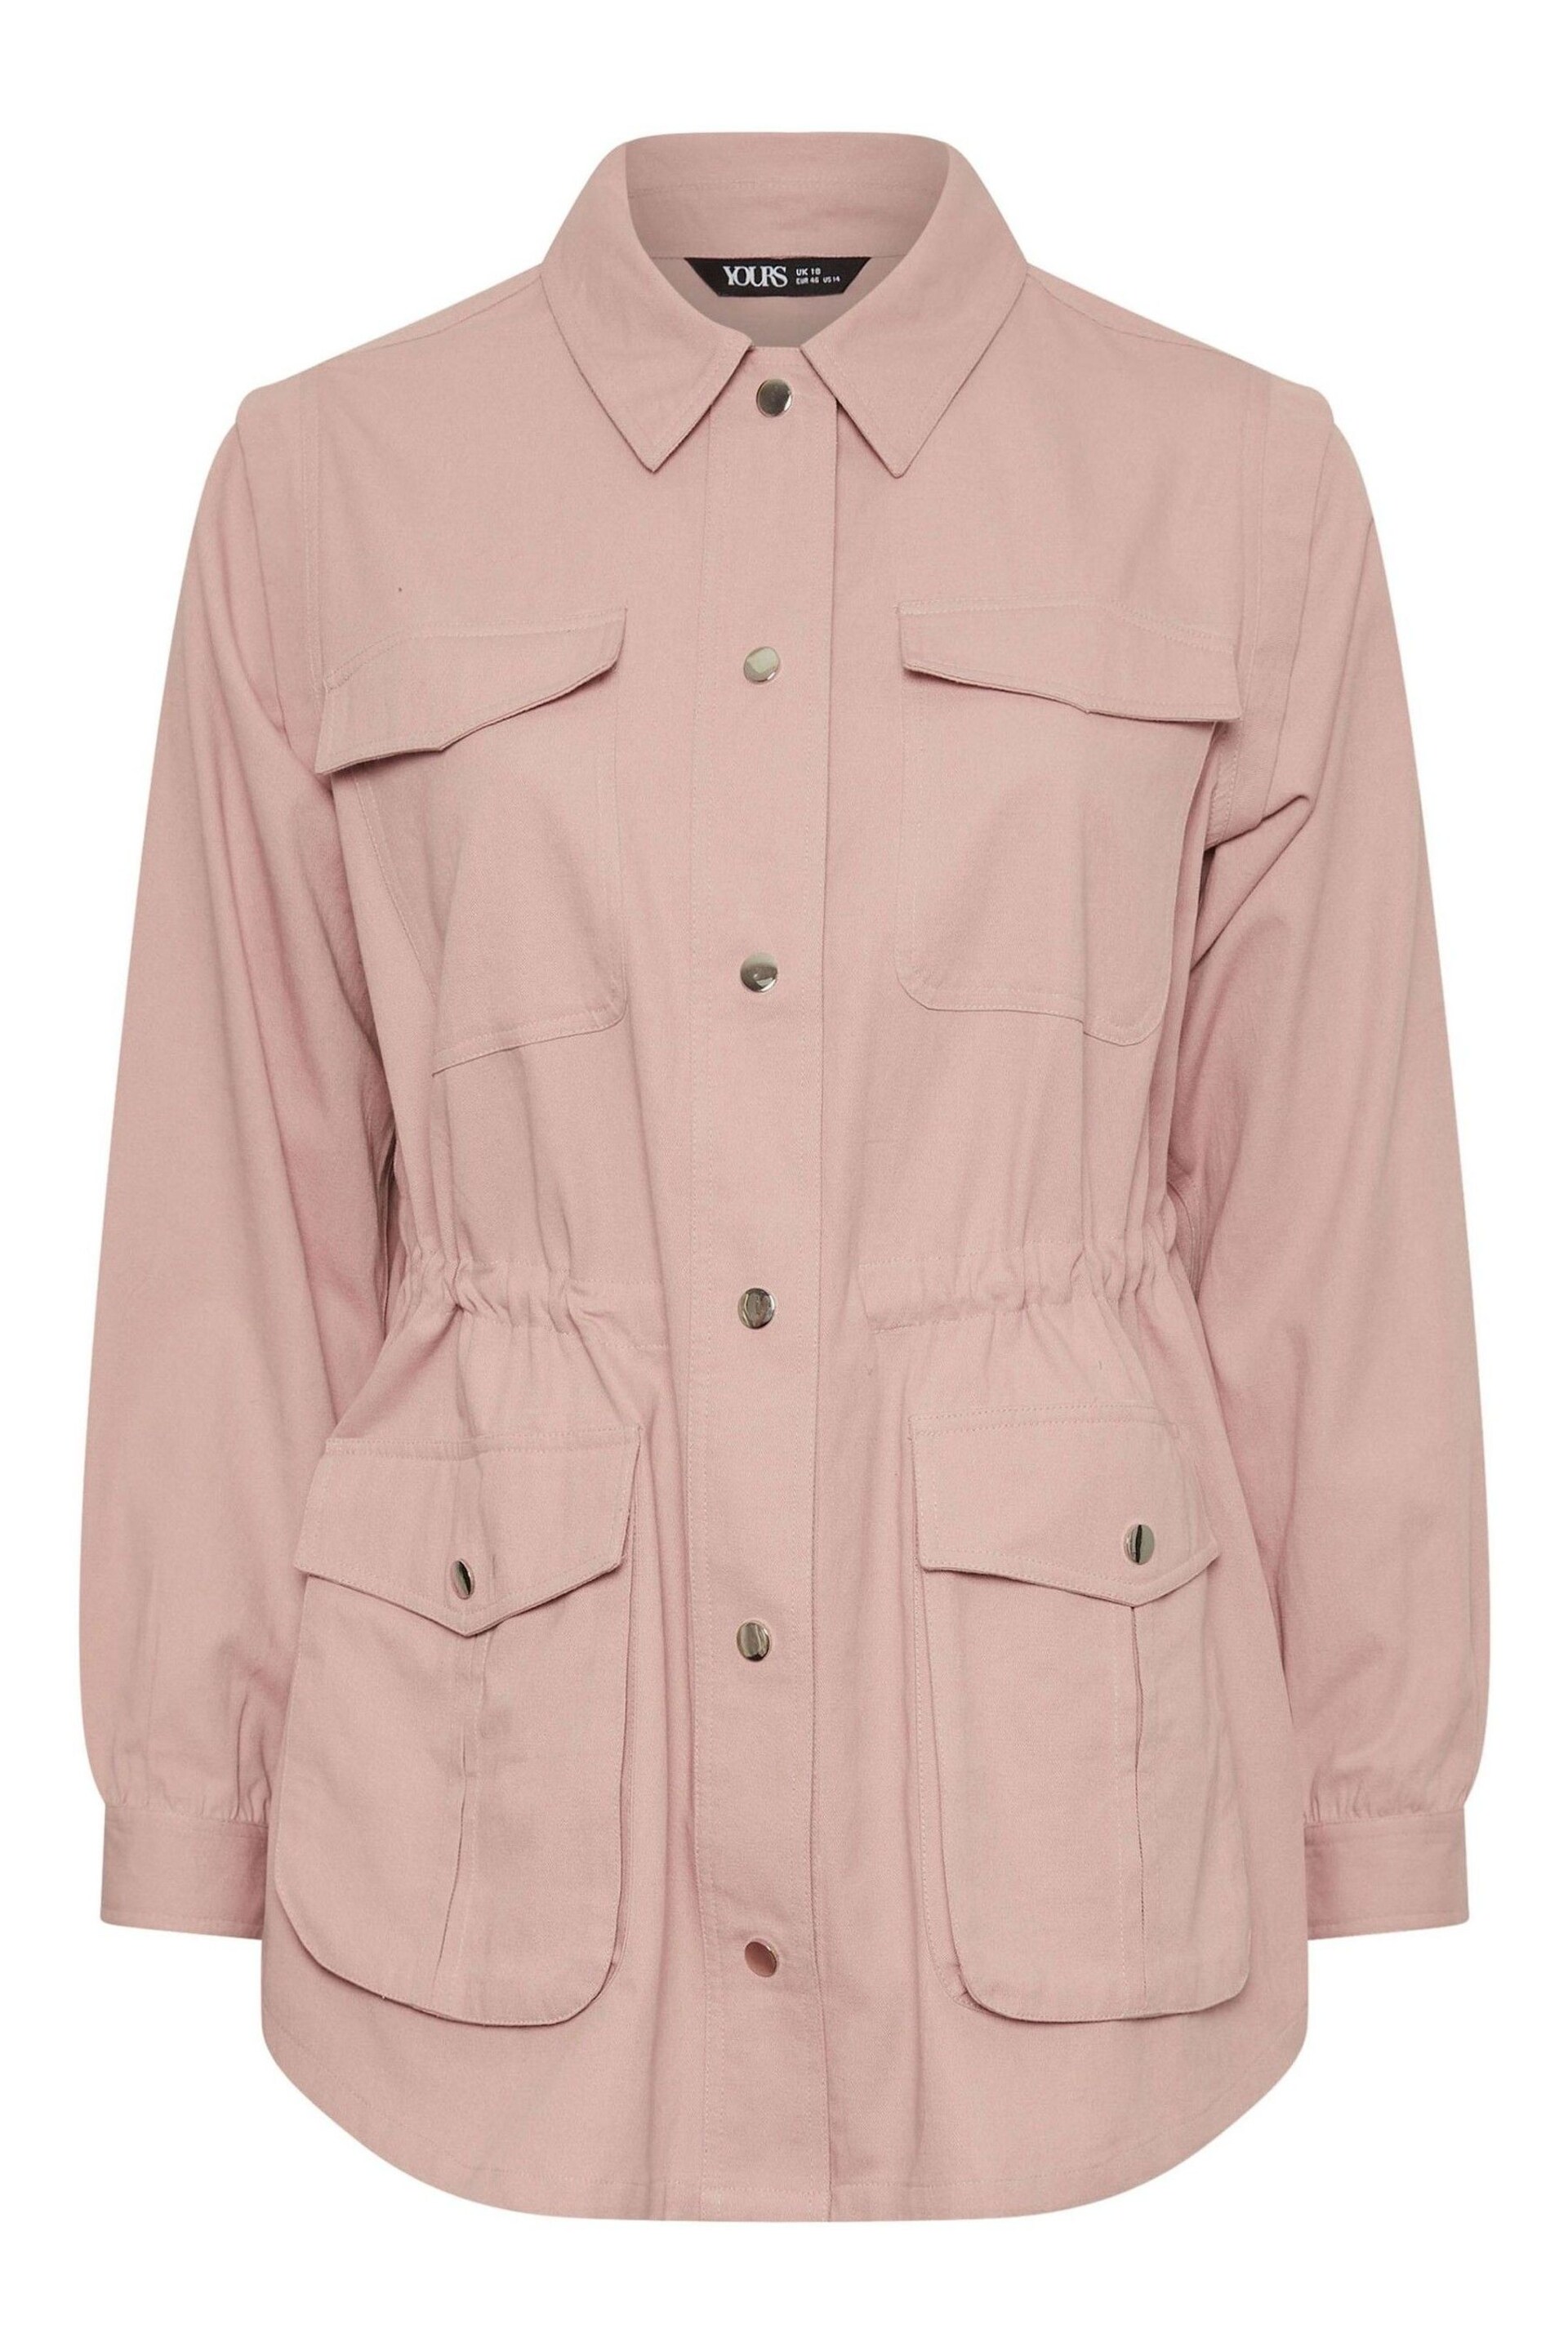 Yours Curve Pink Carpenter Twill Jacket - Image 5 of 5